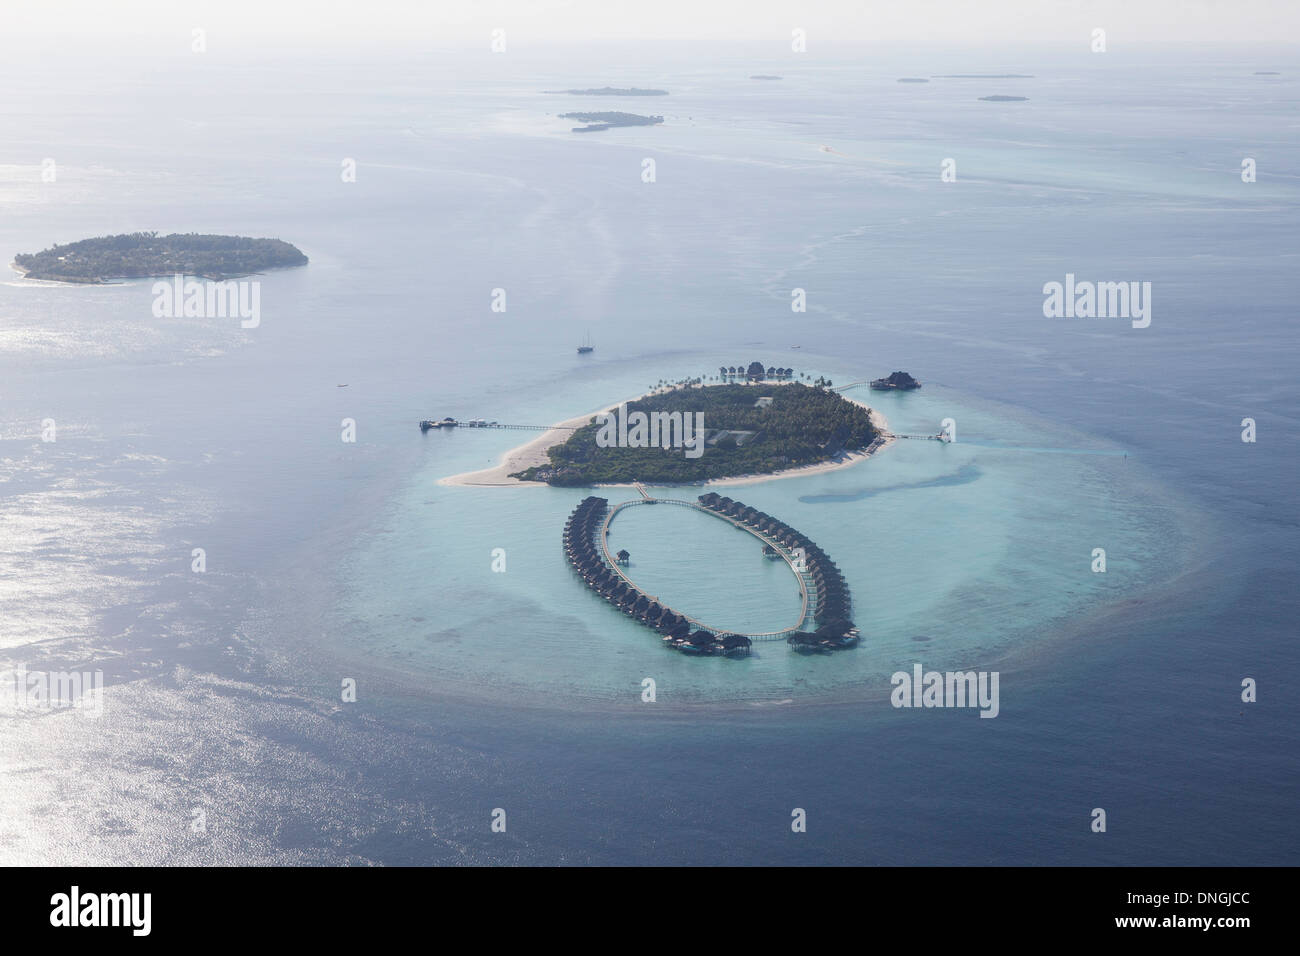 Aerial view of a group of Maldivian Islands Stock Photo